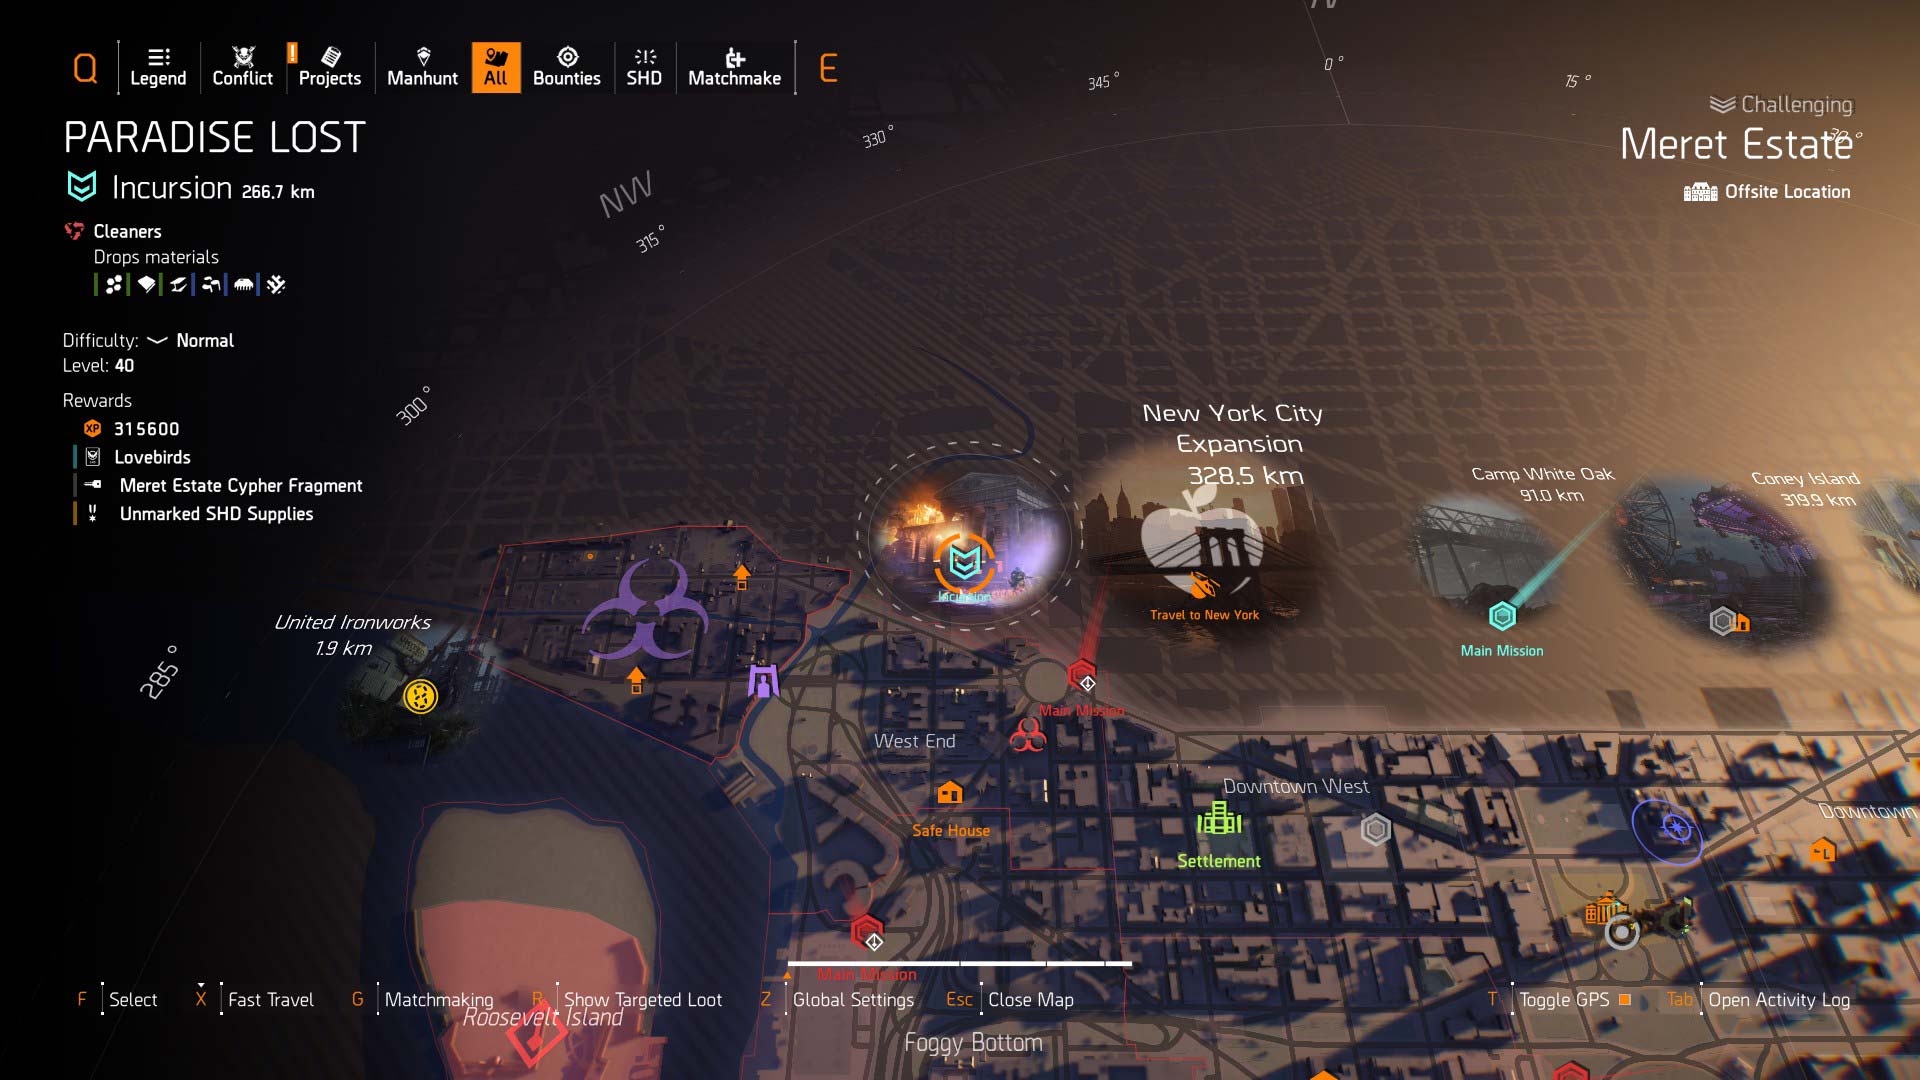 The Division 2 applies several fixes to its Paradise Lost Incursion mission  in latest patch